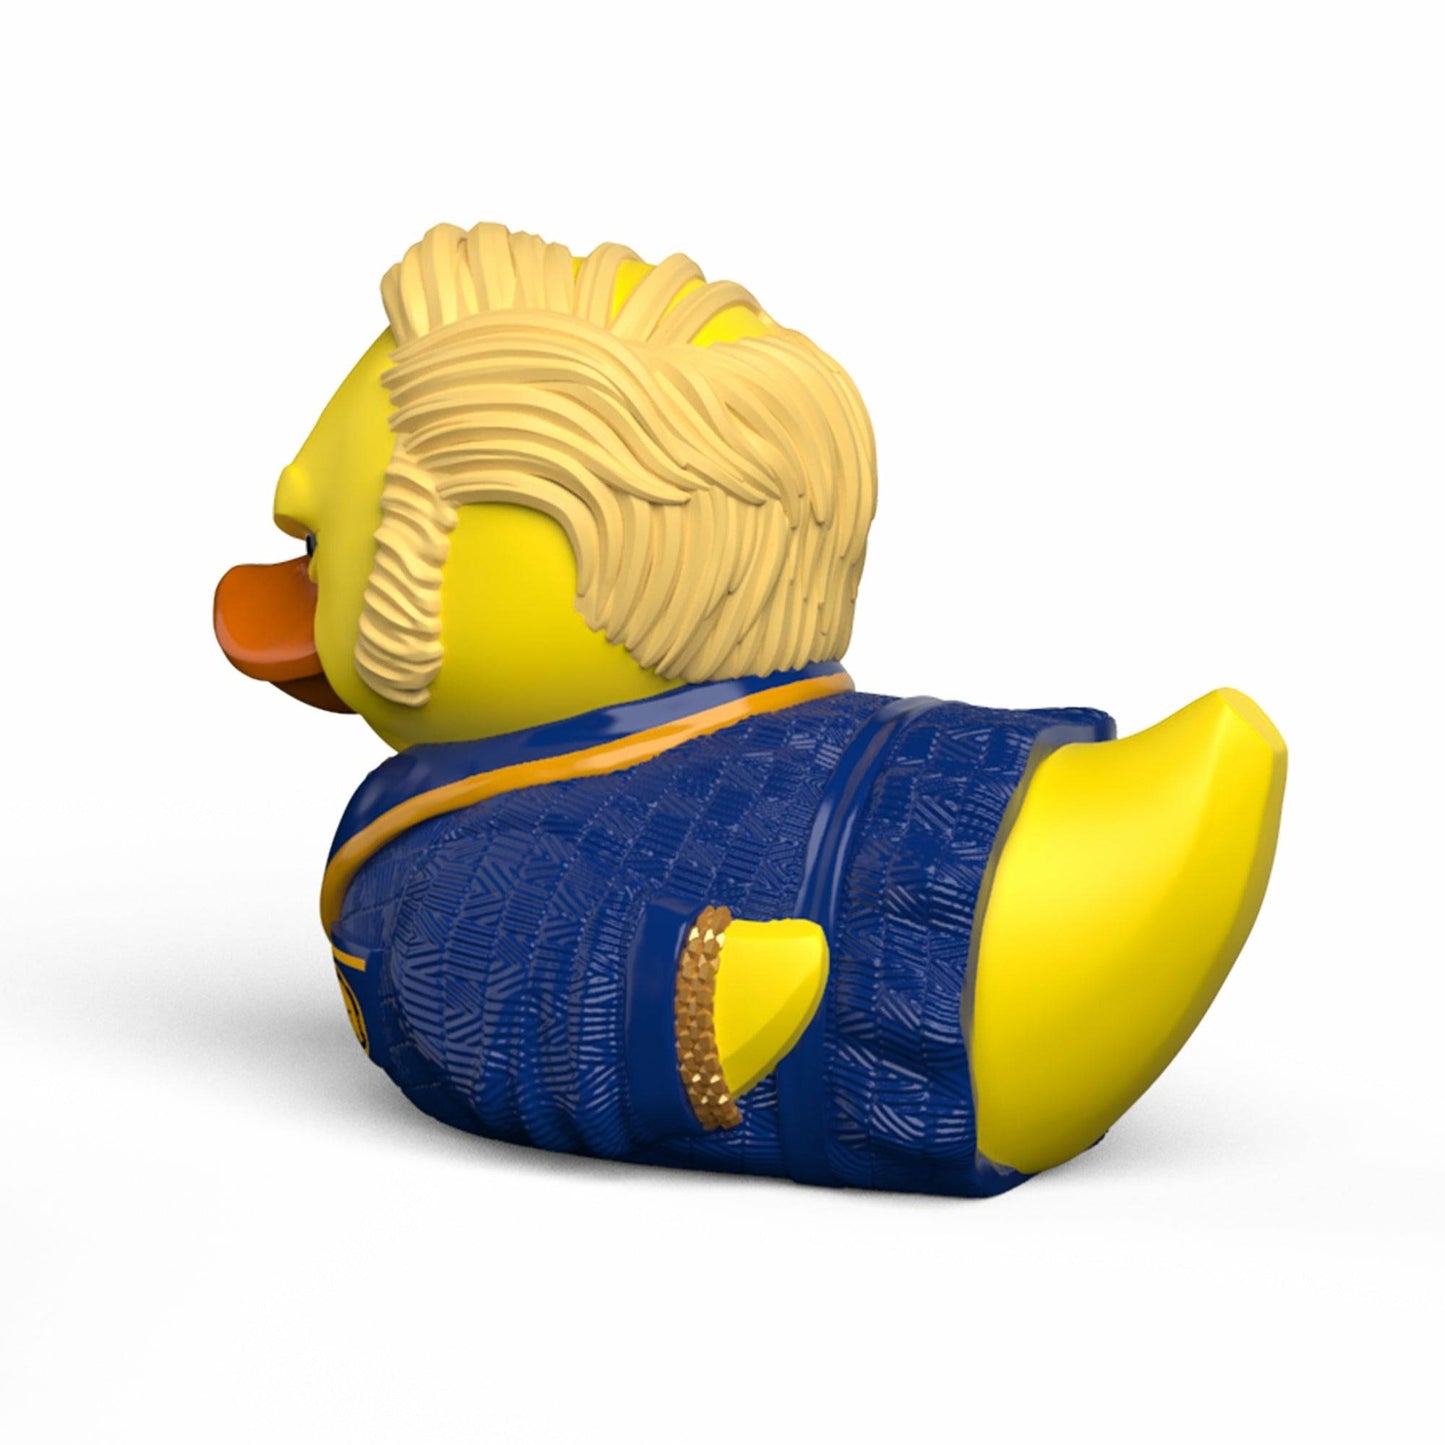 Back to the Future Part II Biff Tannen TUBBZ Cosplaying Duck Collectible Vinyl Toy Numskull